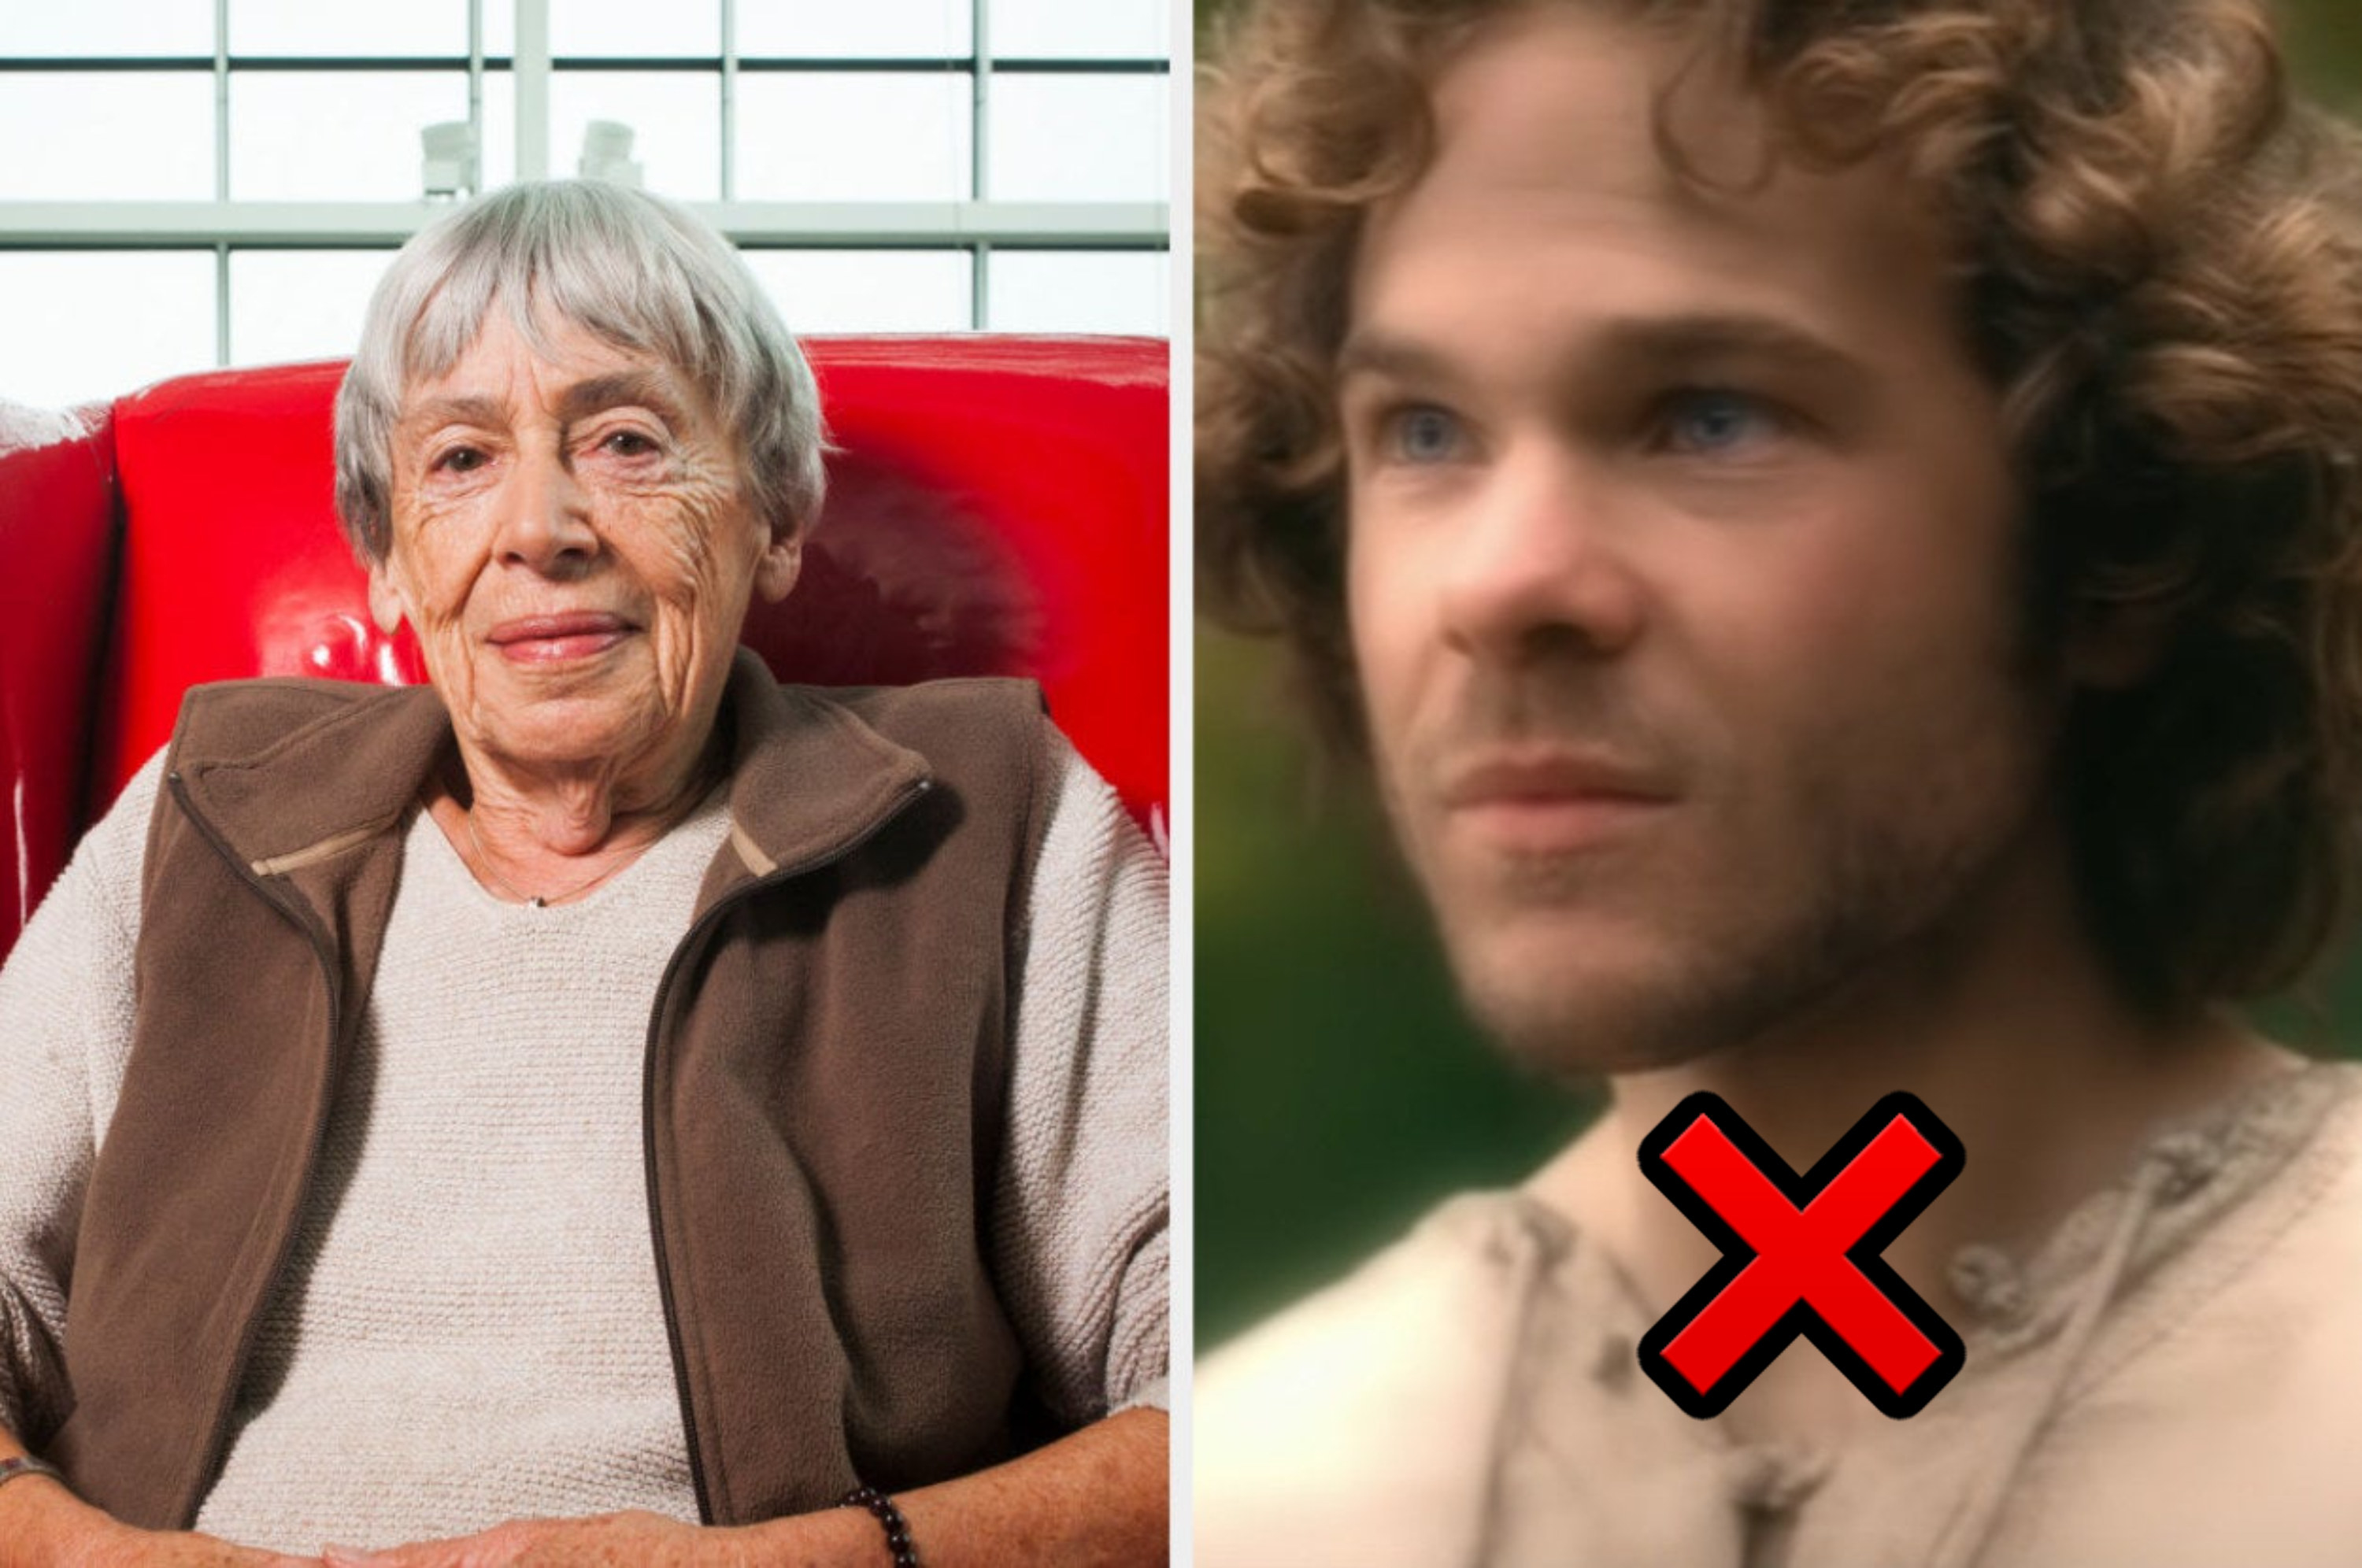 Le Guin and Shawn Ashmore as Ged